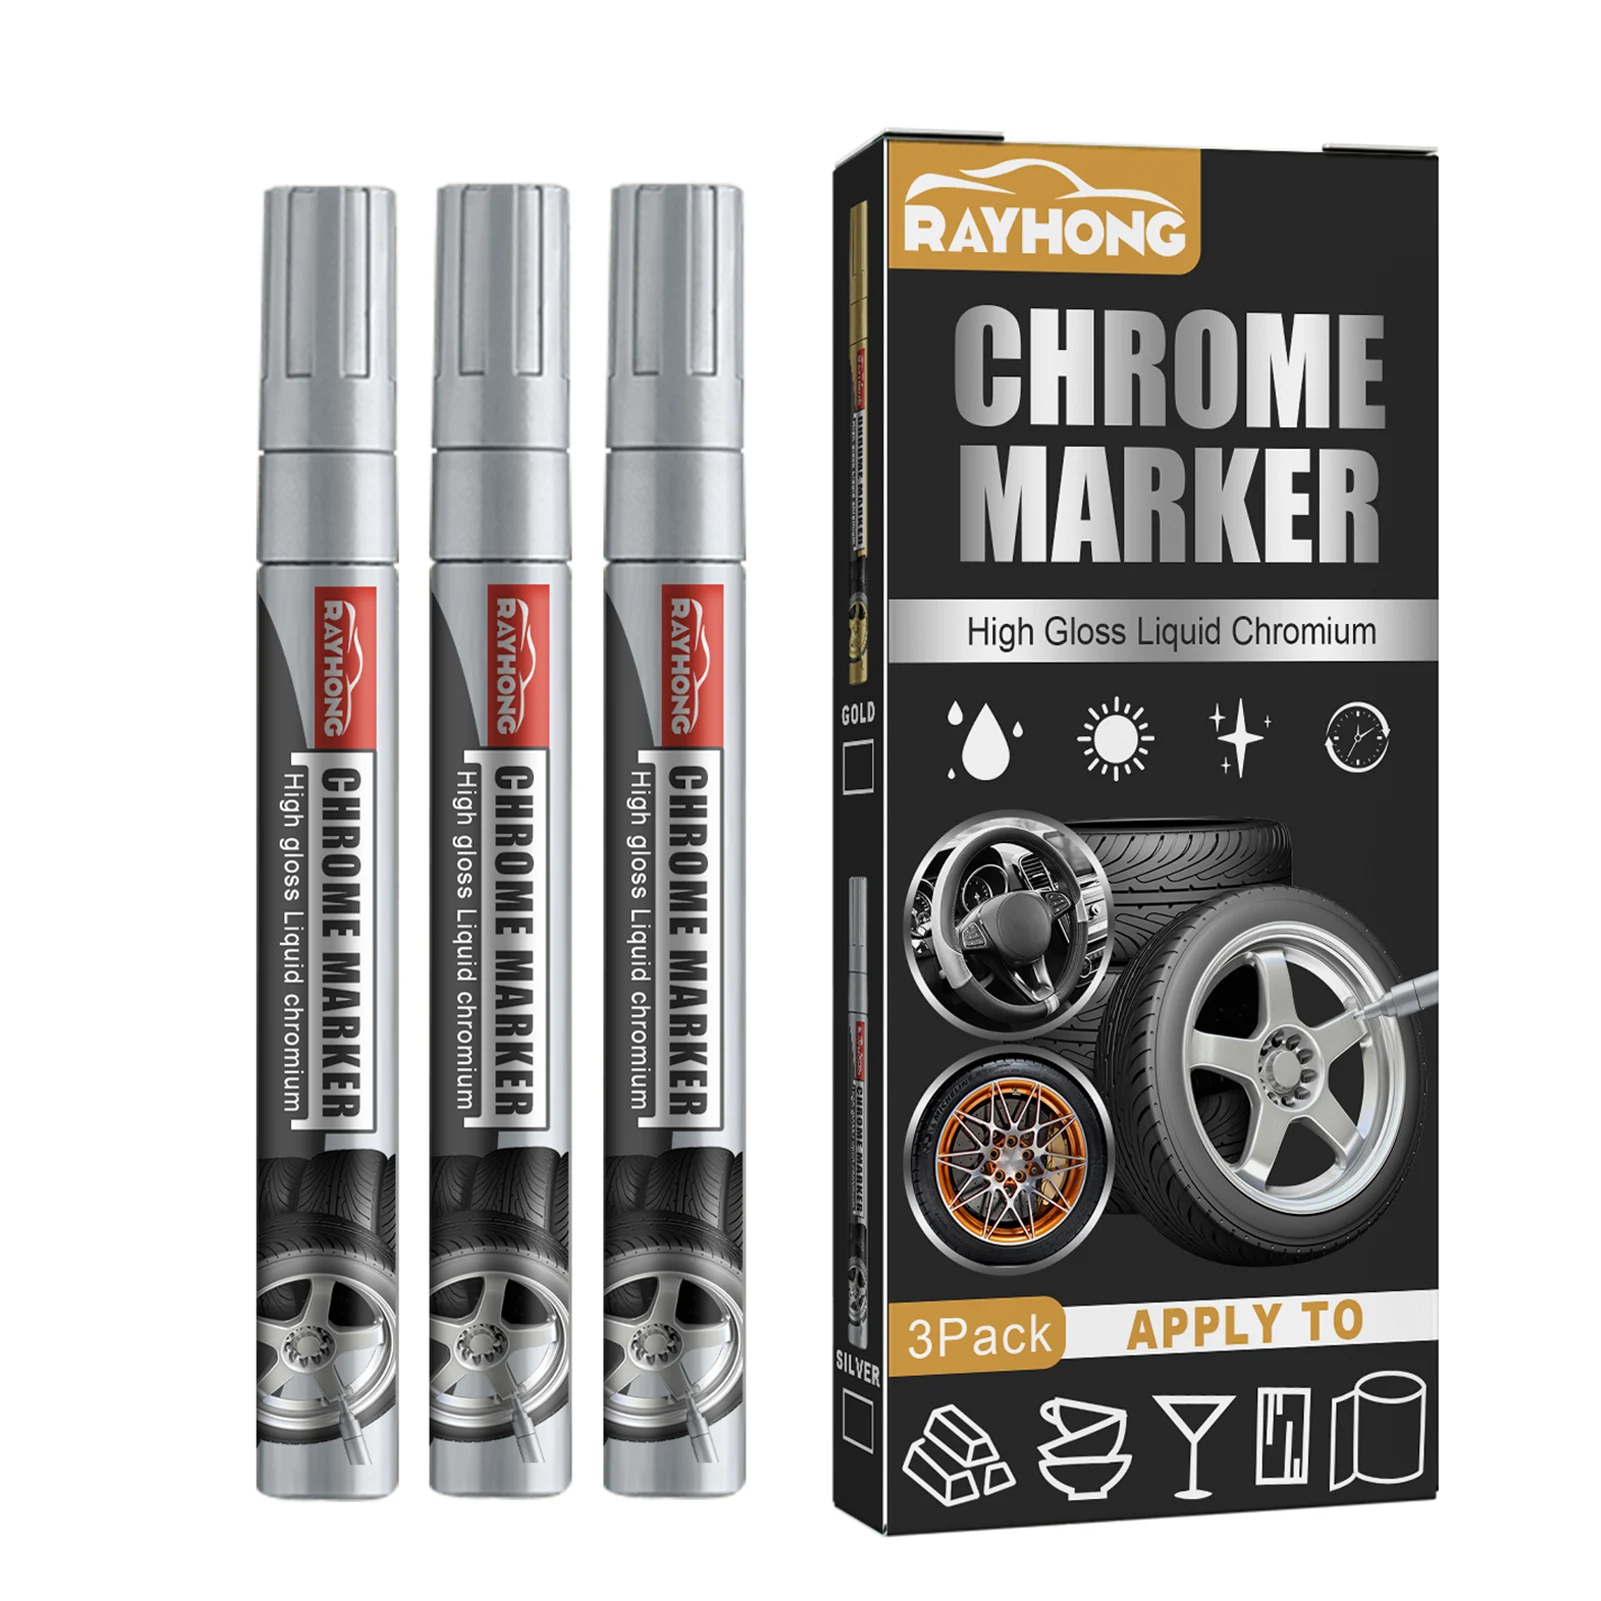 Chrome Marker Pen White Tire Marker For Bike & Car Tires Tyre Markers For Car Tires Waterproof Car Tire Pen Suitable For Rubber